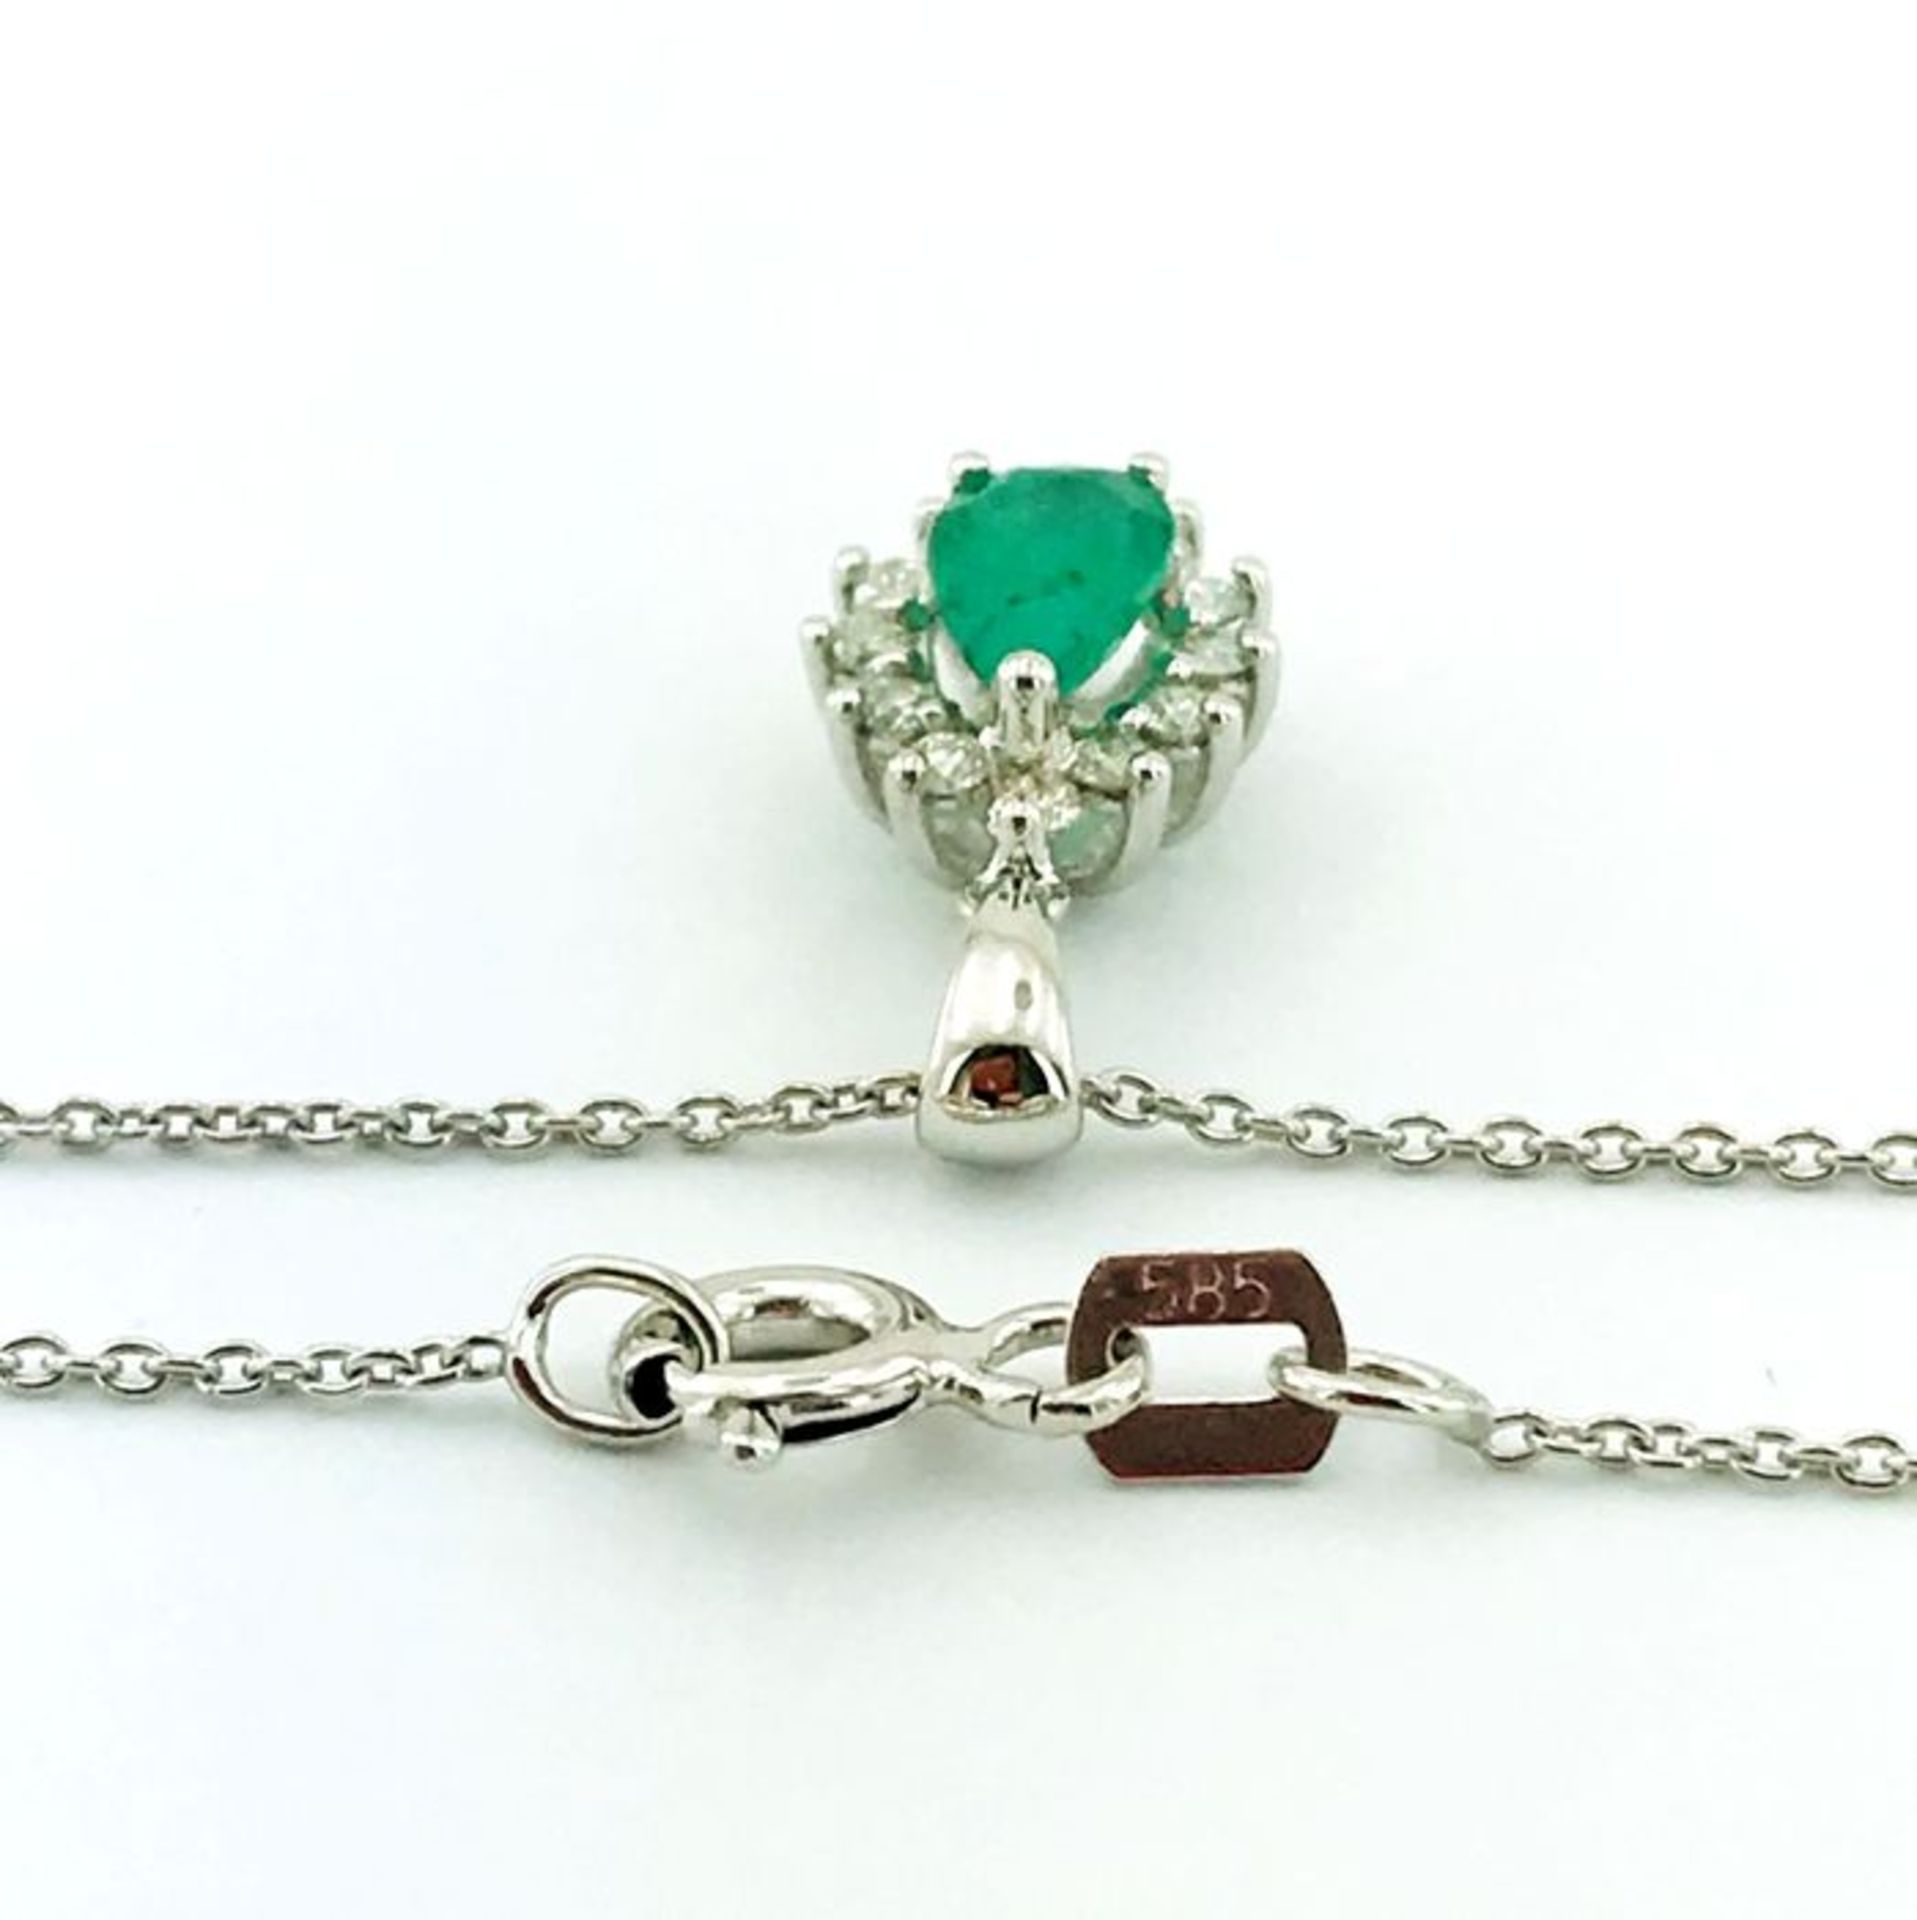 14K White Gold Cluster Pendant set with a natural emerald and 12 brilliant cut diamonds - Image 3 of 4